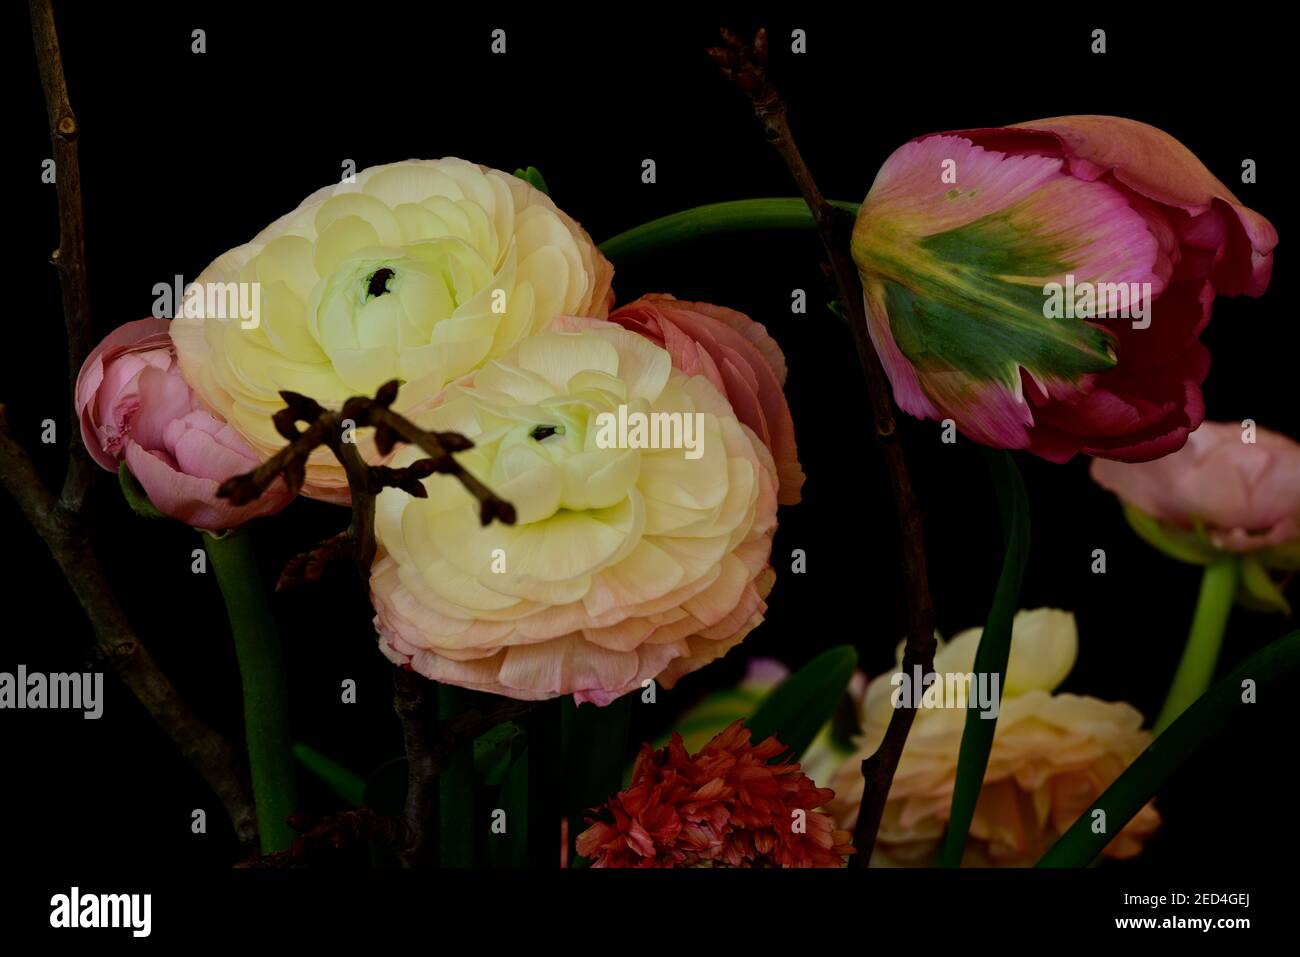 Flowers against a black background.  Parrot Tulpis, Parrot tulip, (Tulpia),  ranunculus (Ranunculus asiaticus), Cherry branches, Barbara branches. Stock Photo